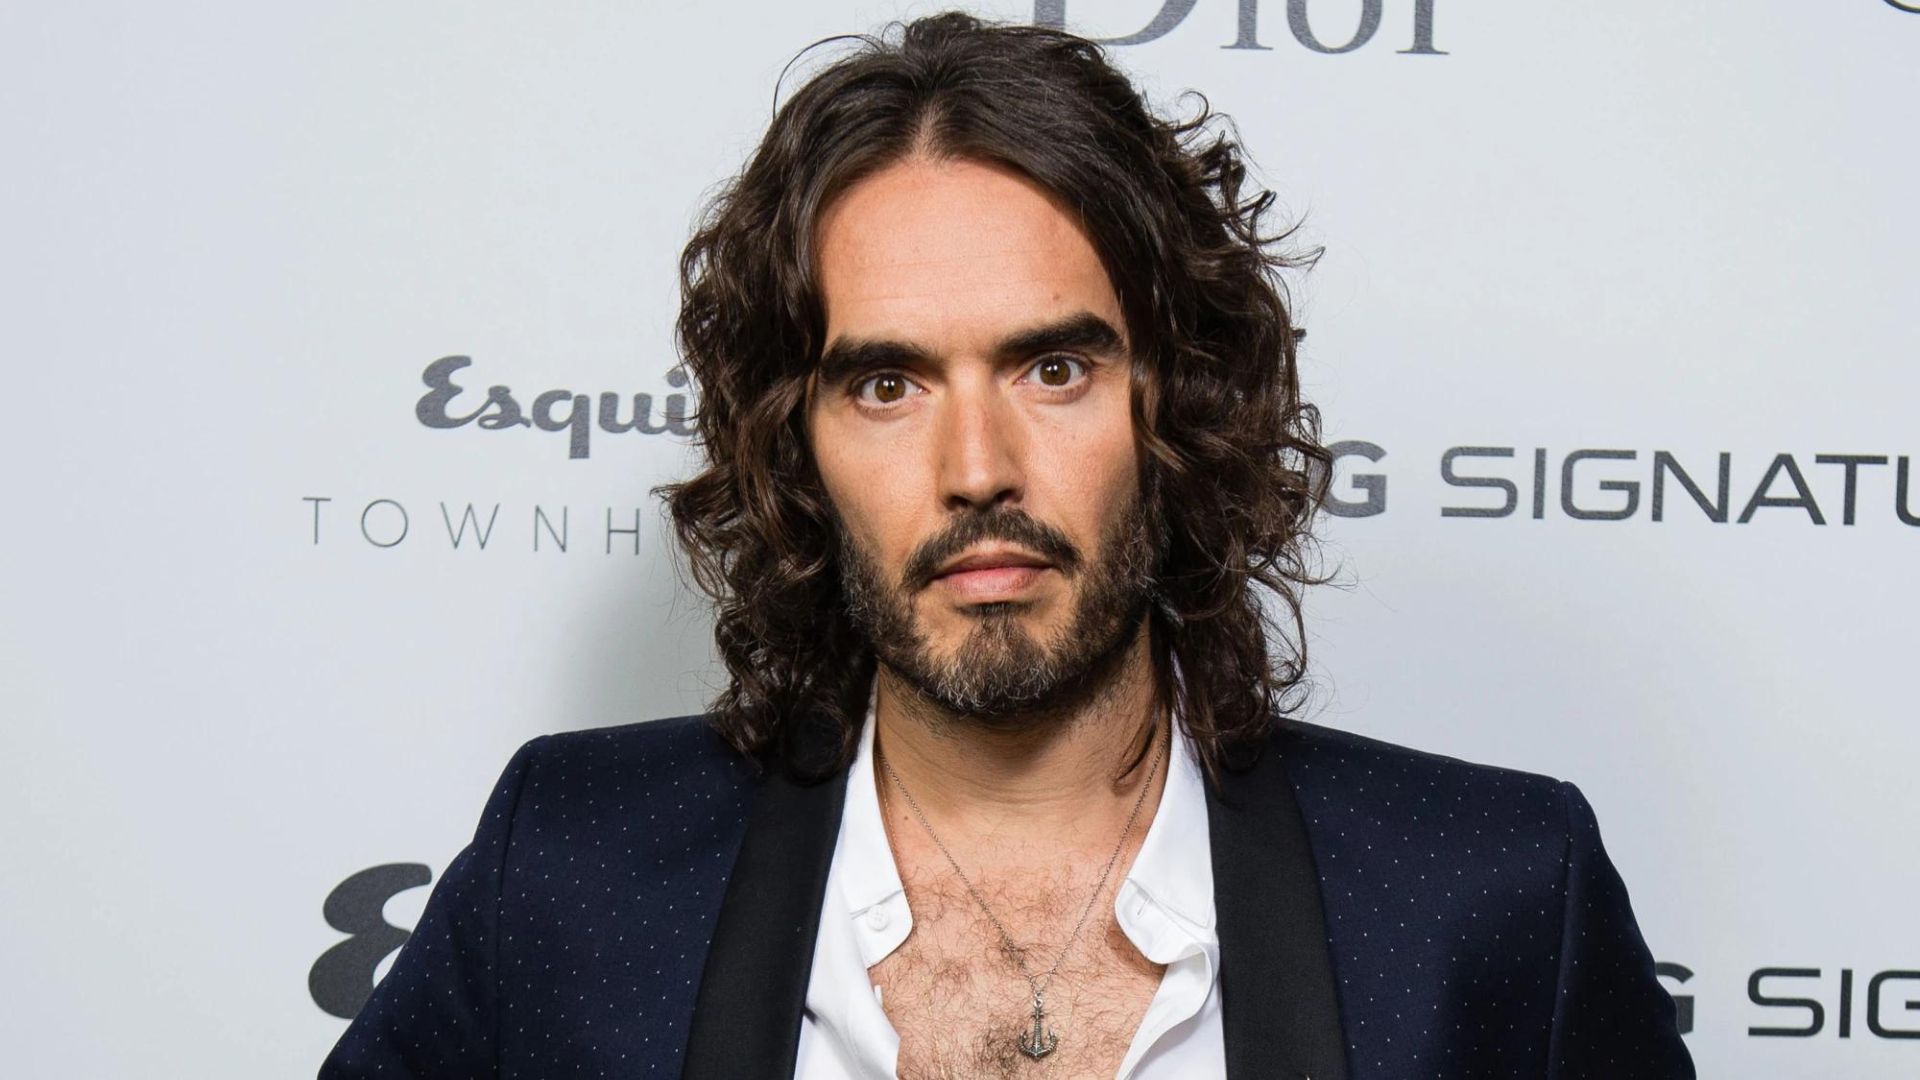 Russell Brand Wearing Black And White Suit